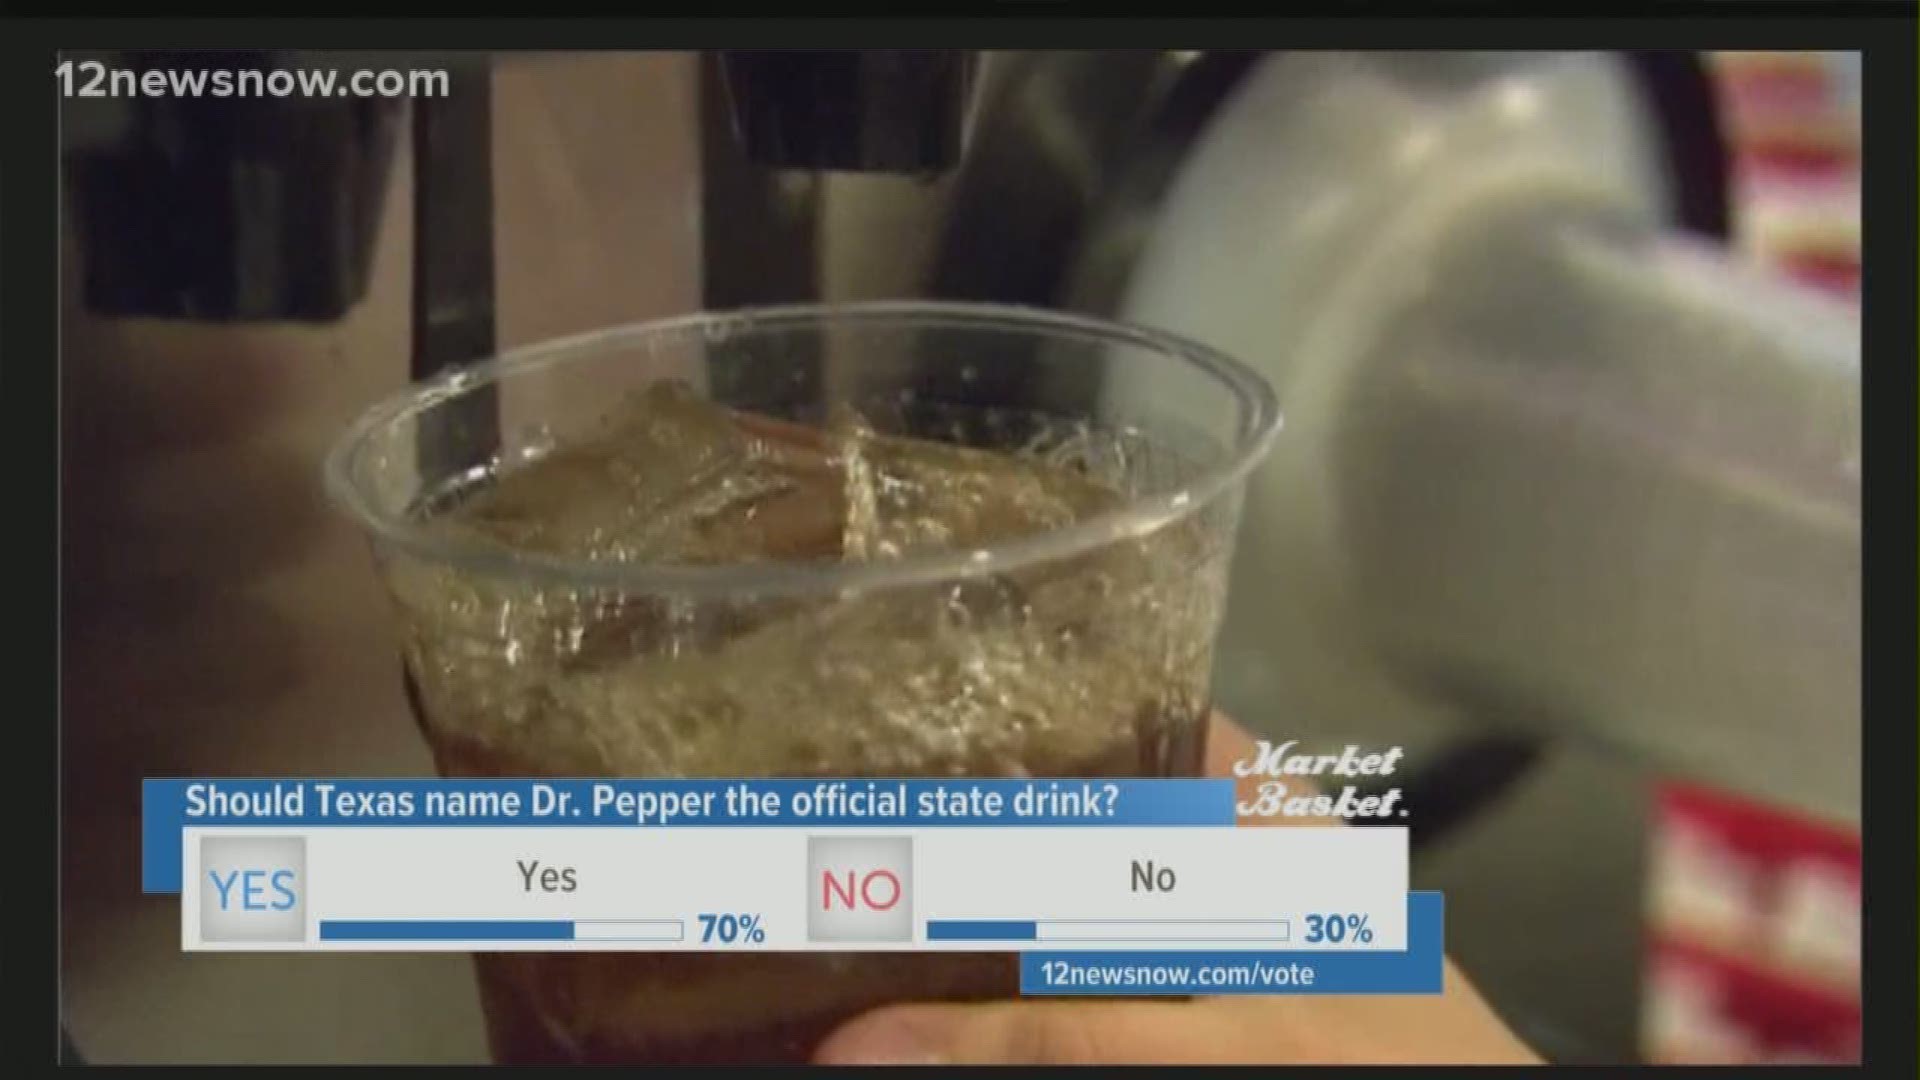 The petition seeks 7500 signatures to endorse Dr. Pepper as the official soft drink of Texas.